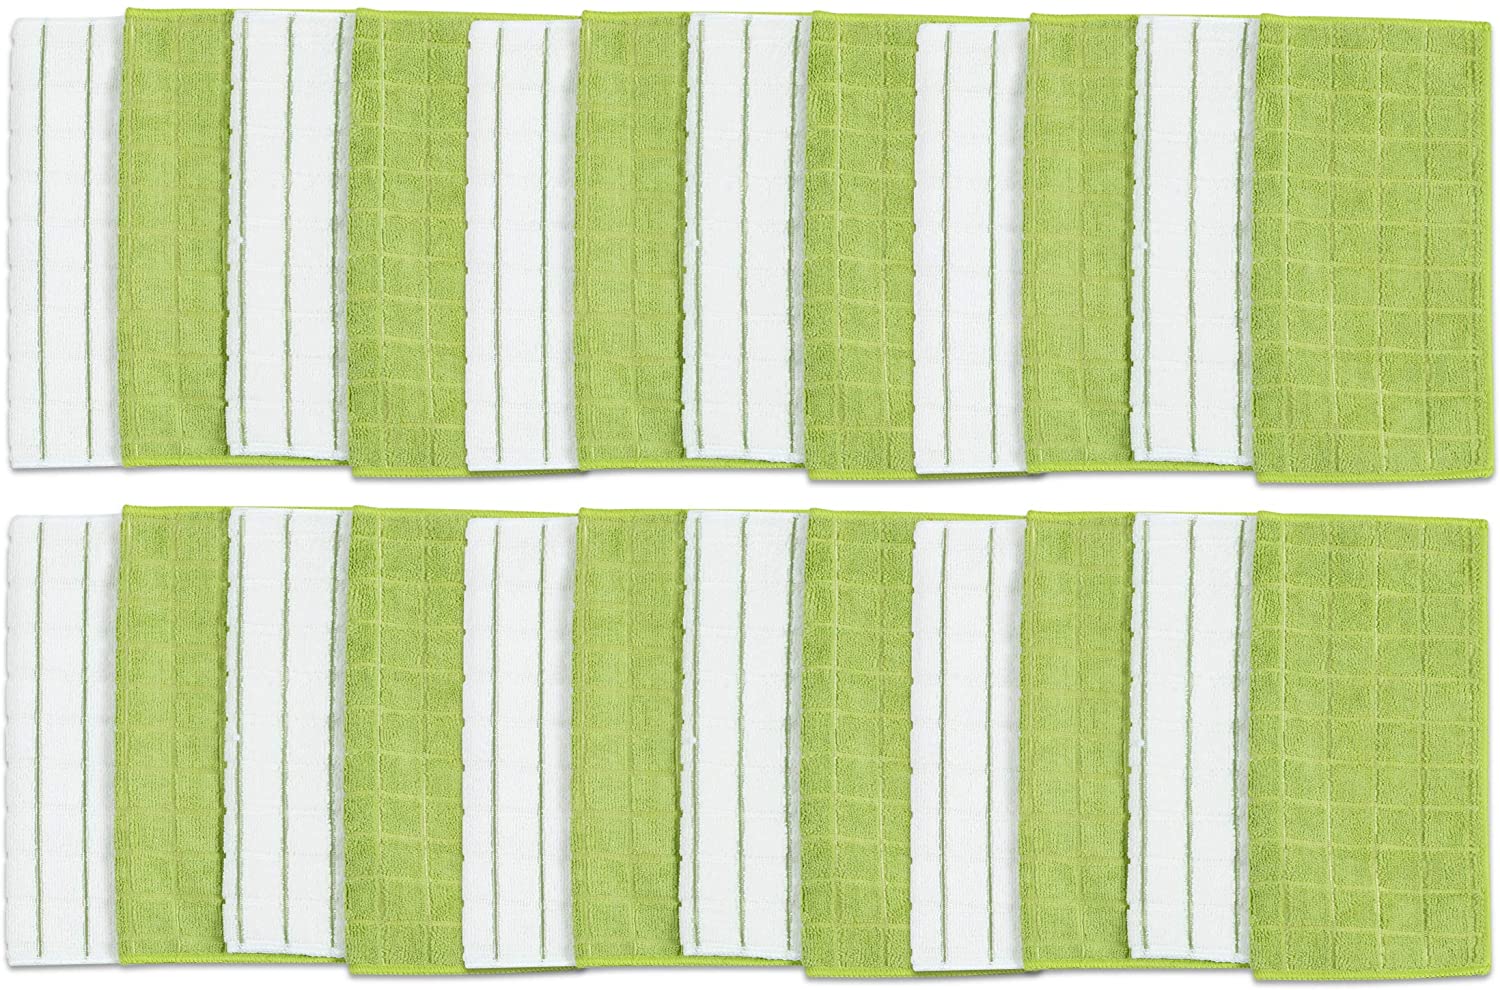 woot!, 24 pack Simpli-Magic 79288 Microfiber Washcloths, Dish Cloths, Checkered Lime, 12"x12", $4.99, free shipping for Prime